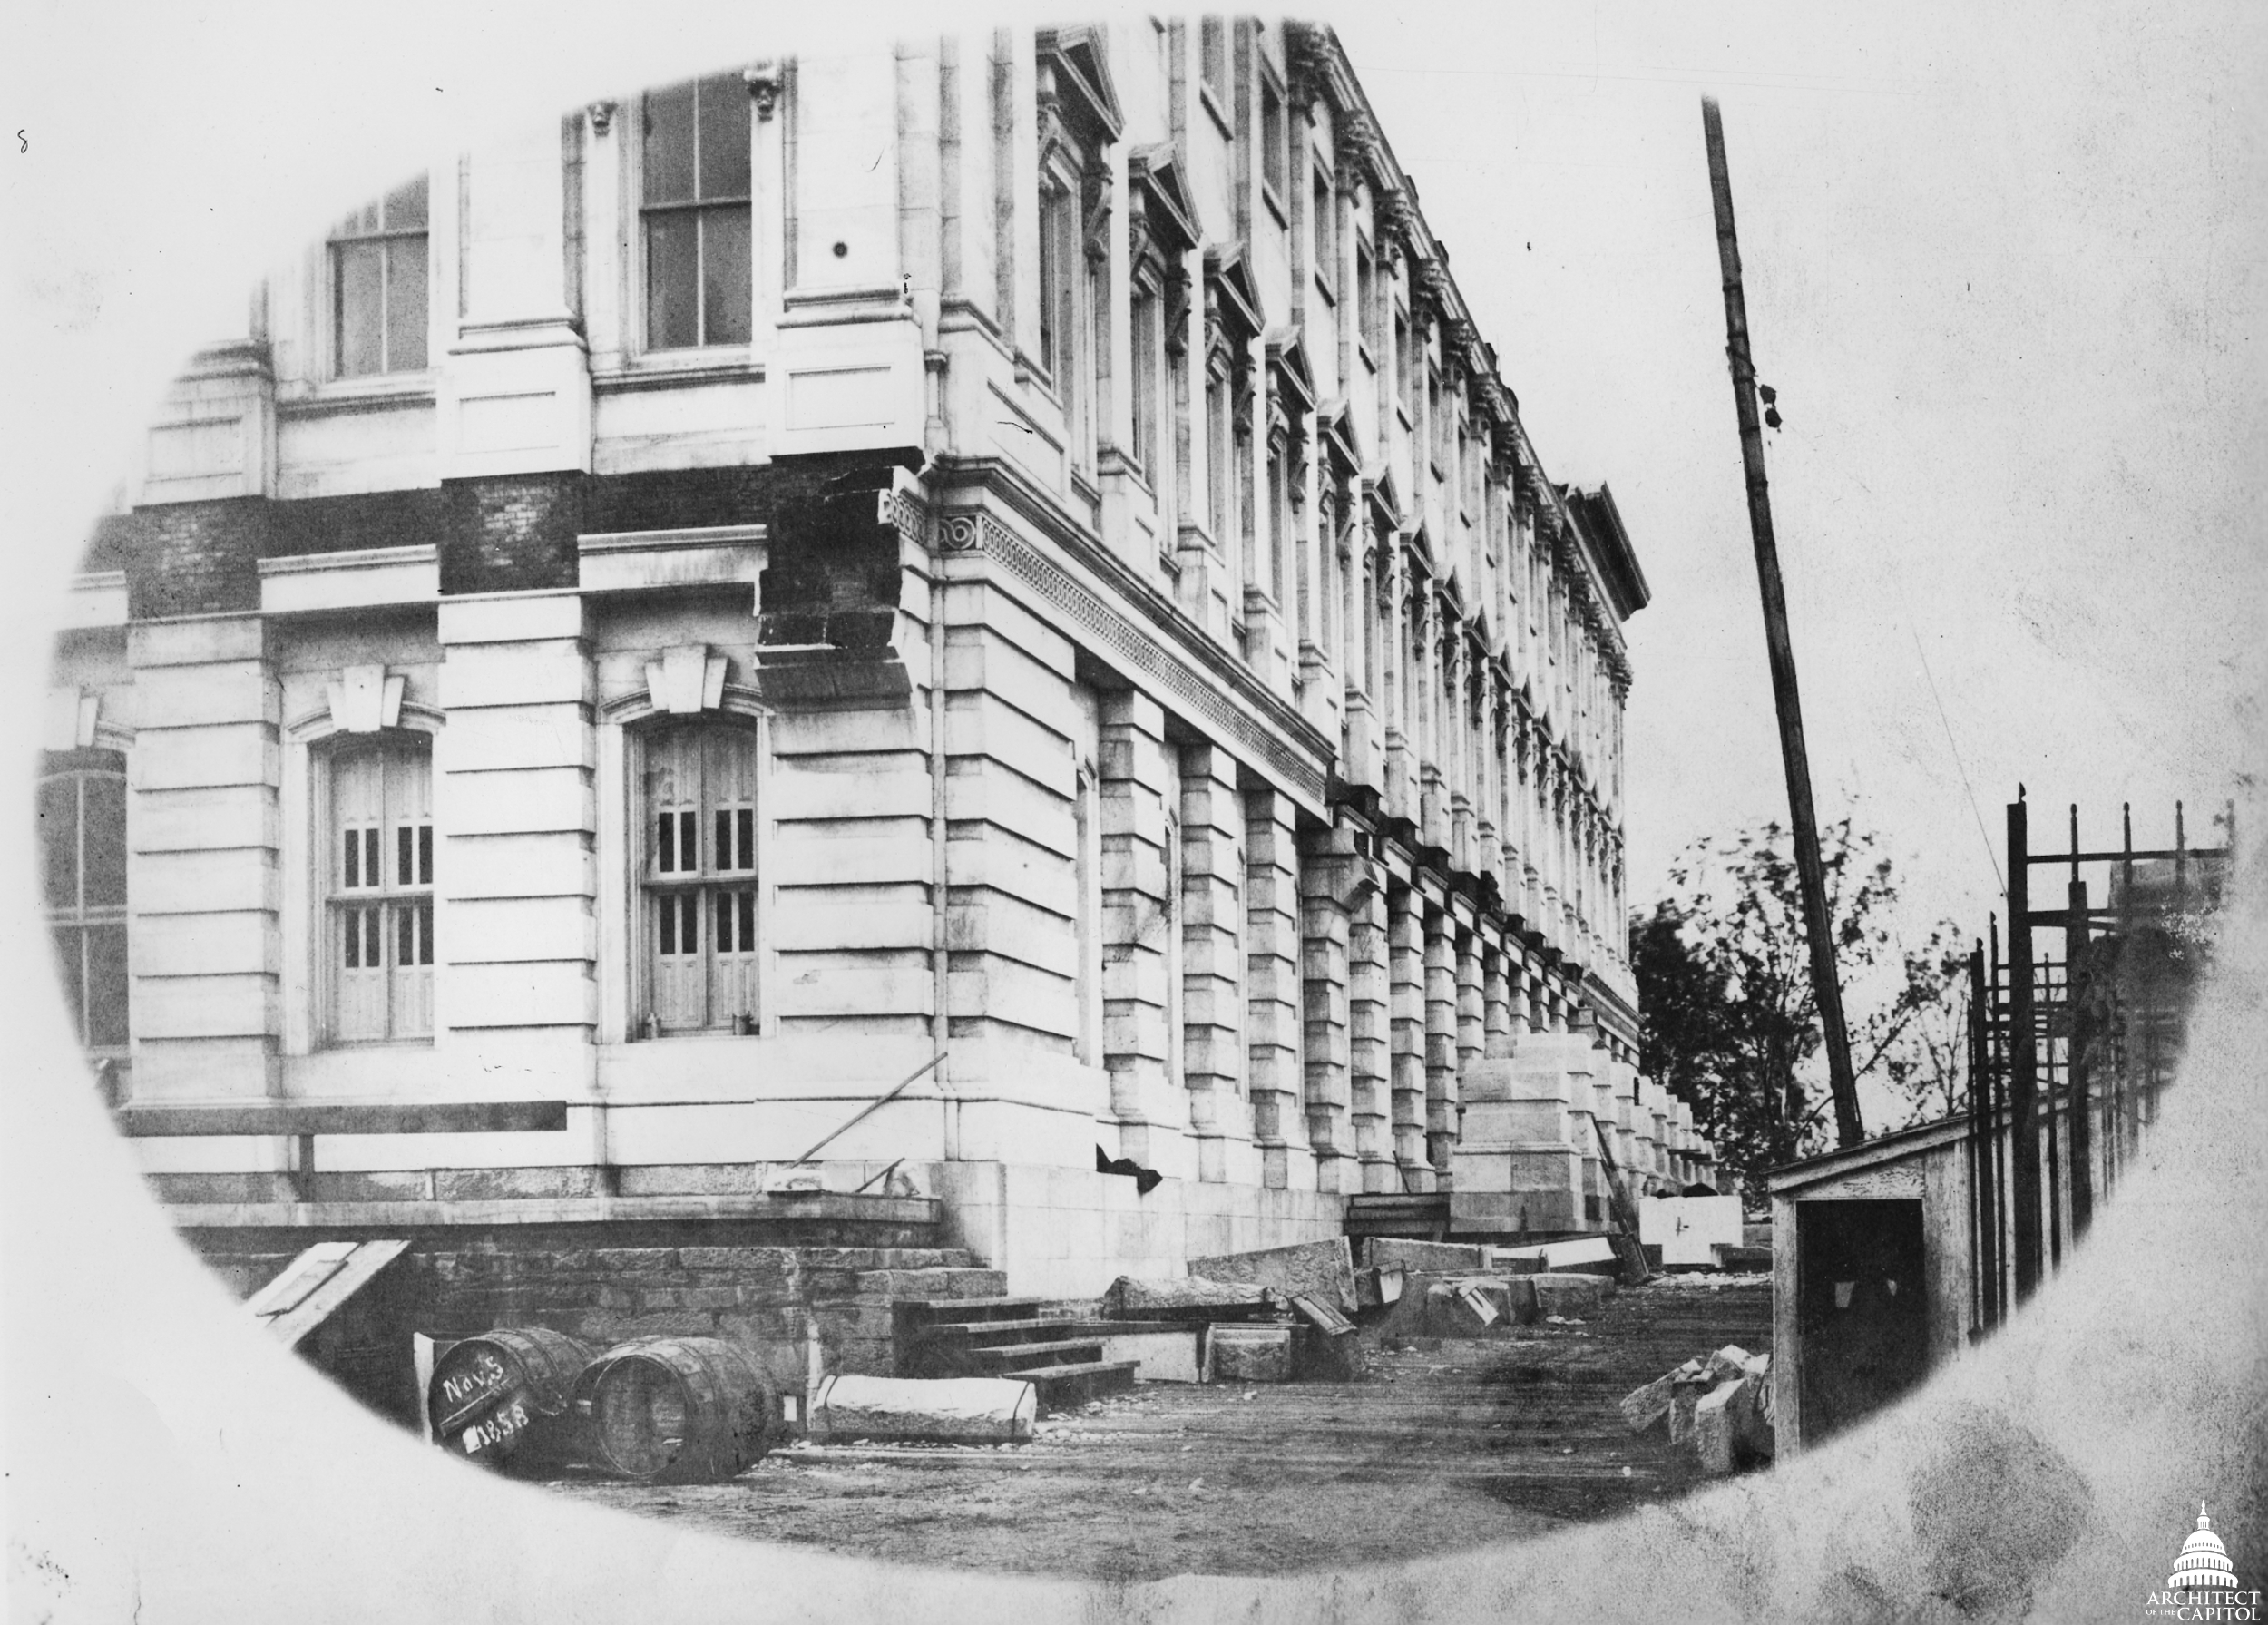 Northeast corner of the Senate wing showing progress on the east portico, 1858.